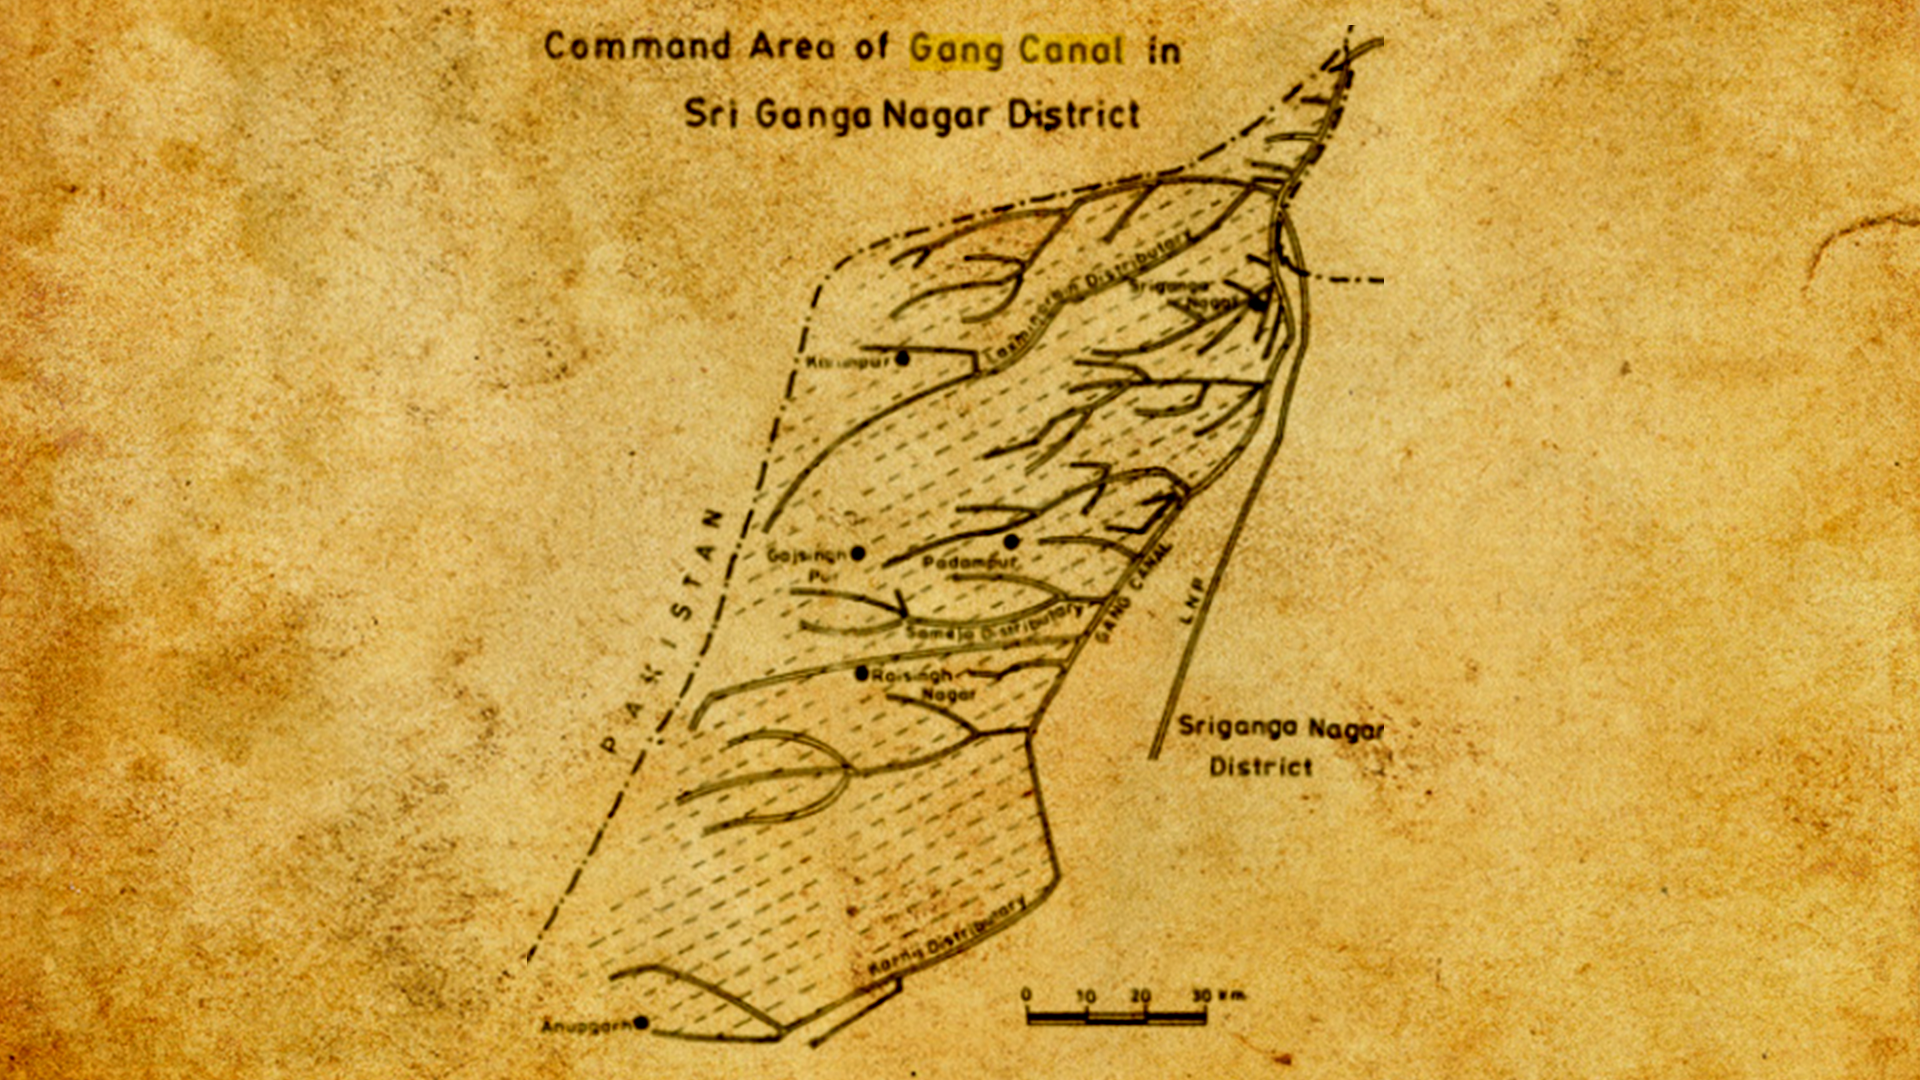 1950s Map of the ‘Gang’ or ‘Ganga’ canal system in Sri Ganganagar 